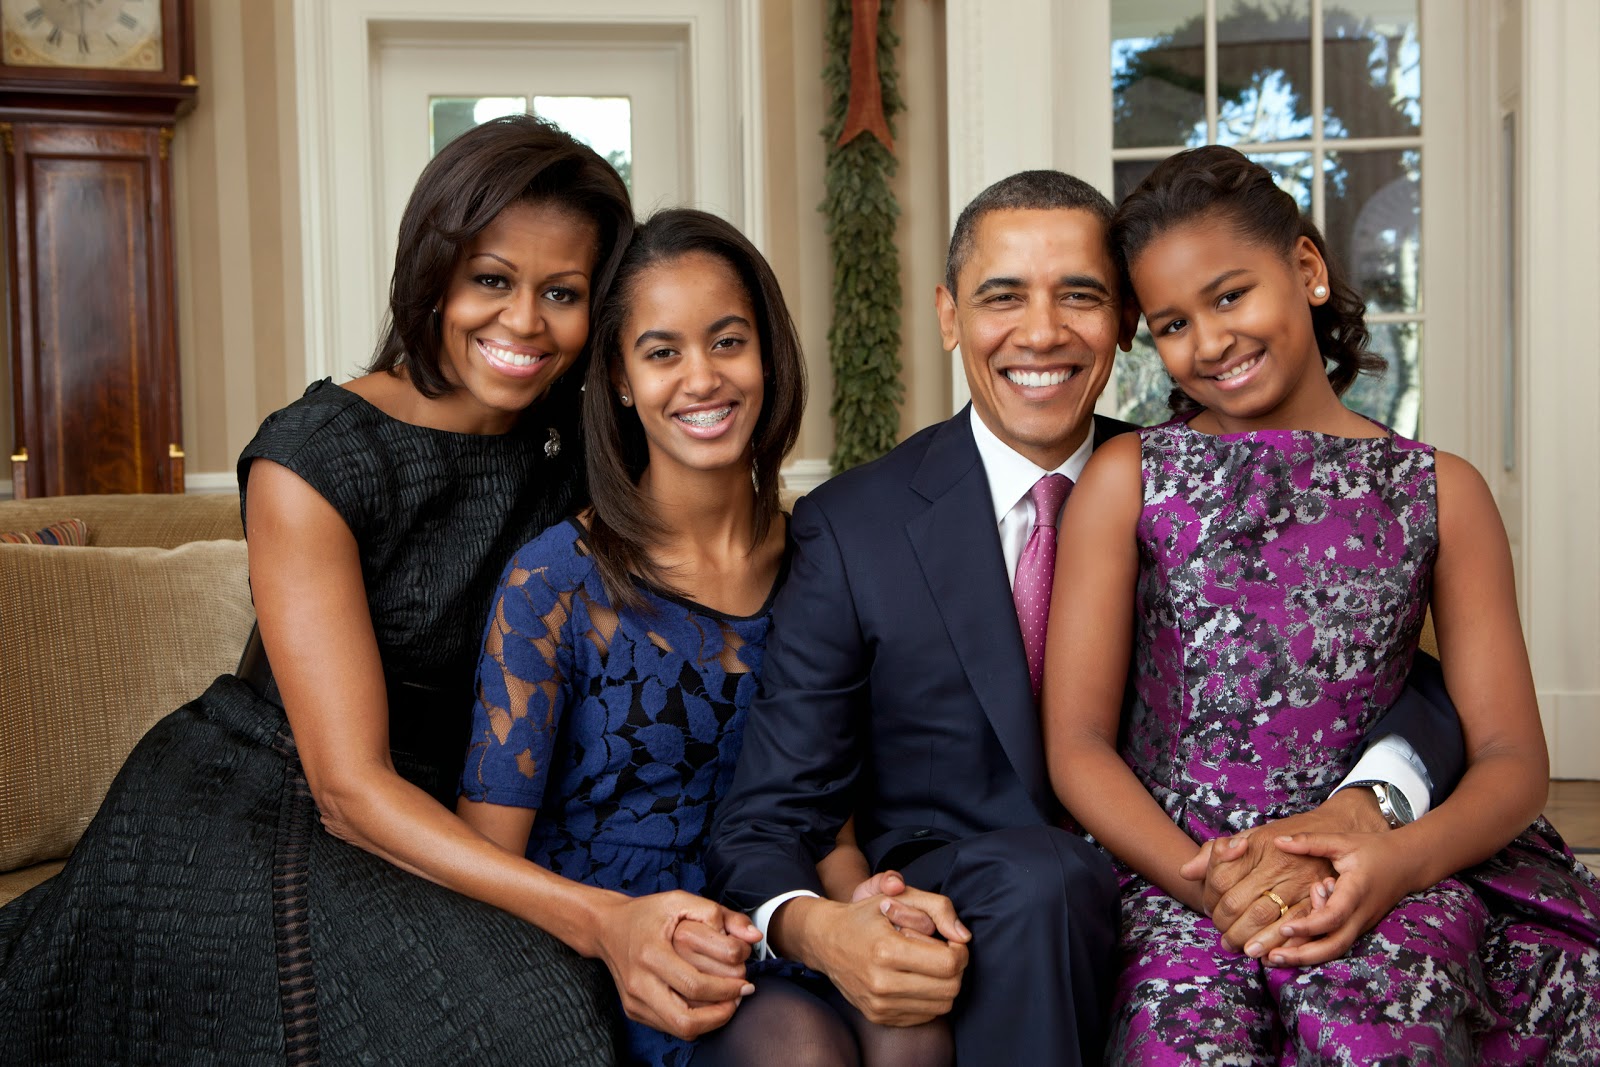 Meanderful: Obama's children are being spied on by the NSA